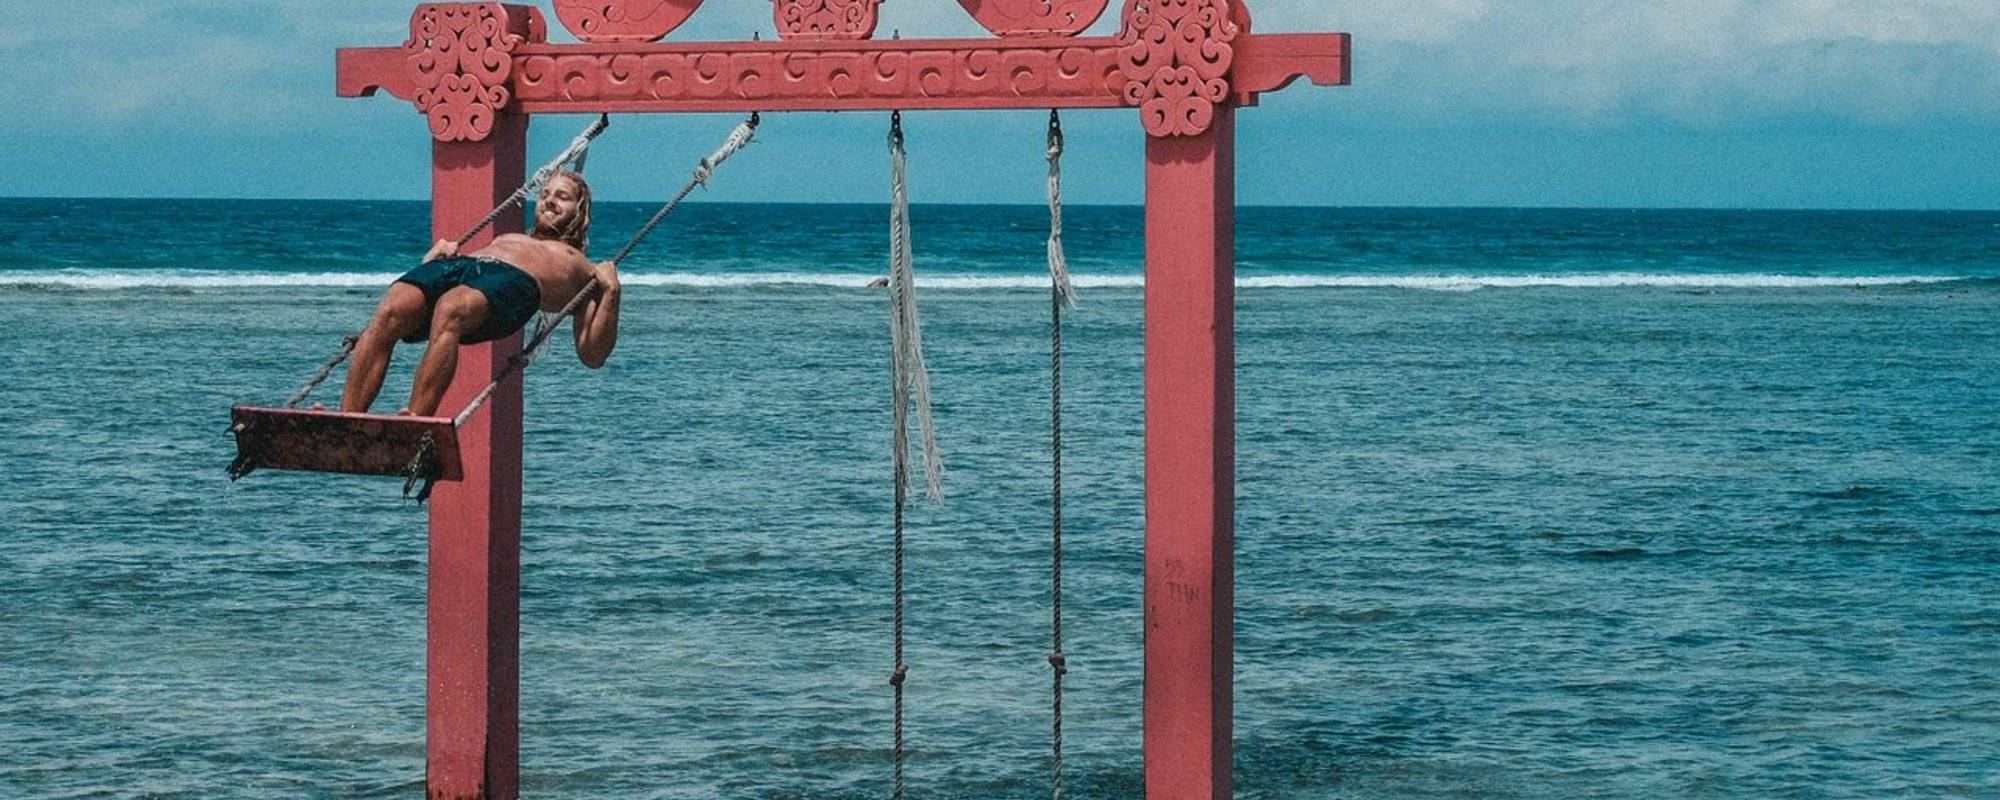 The famous Gili Water Swing